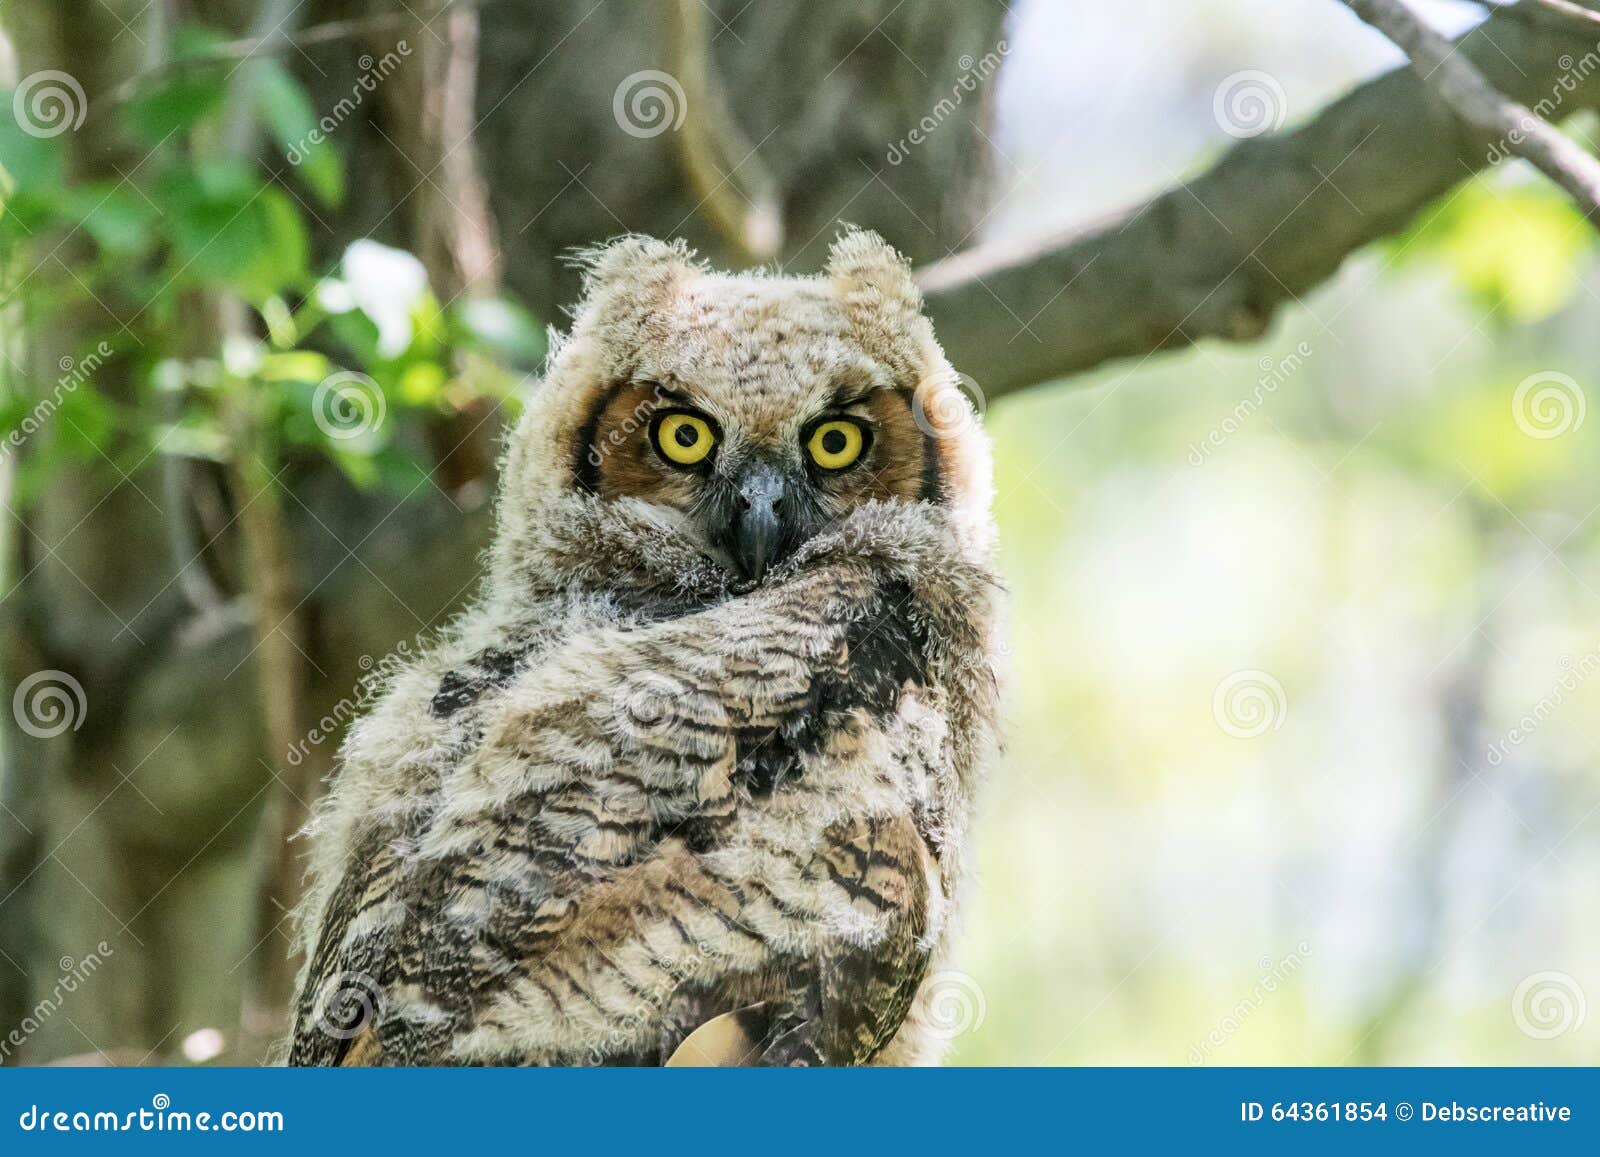 Immature Great Horned Owl stock photo. Image of animals - 64361854